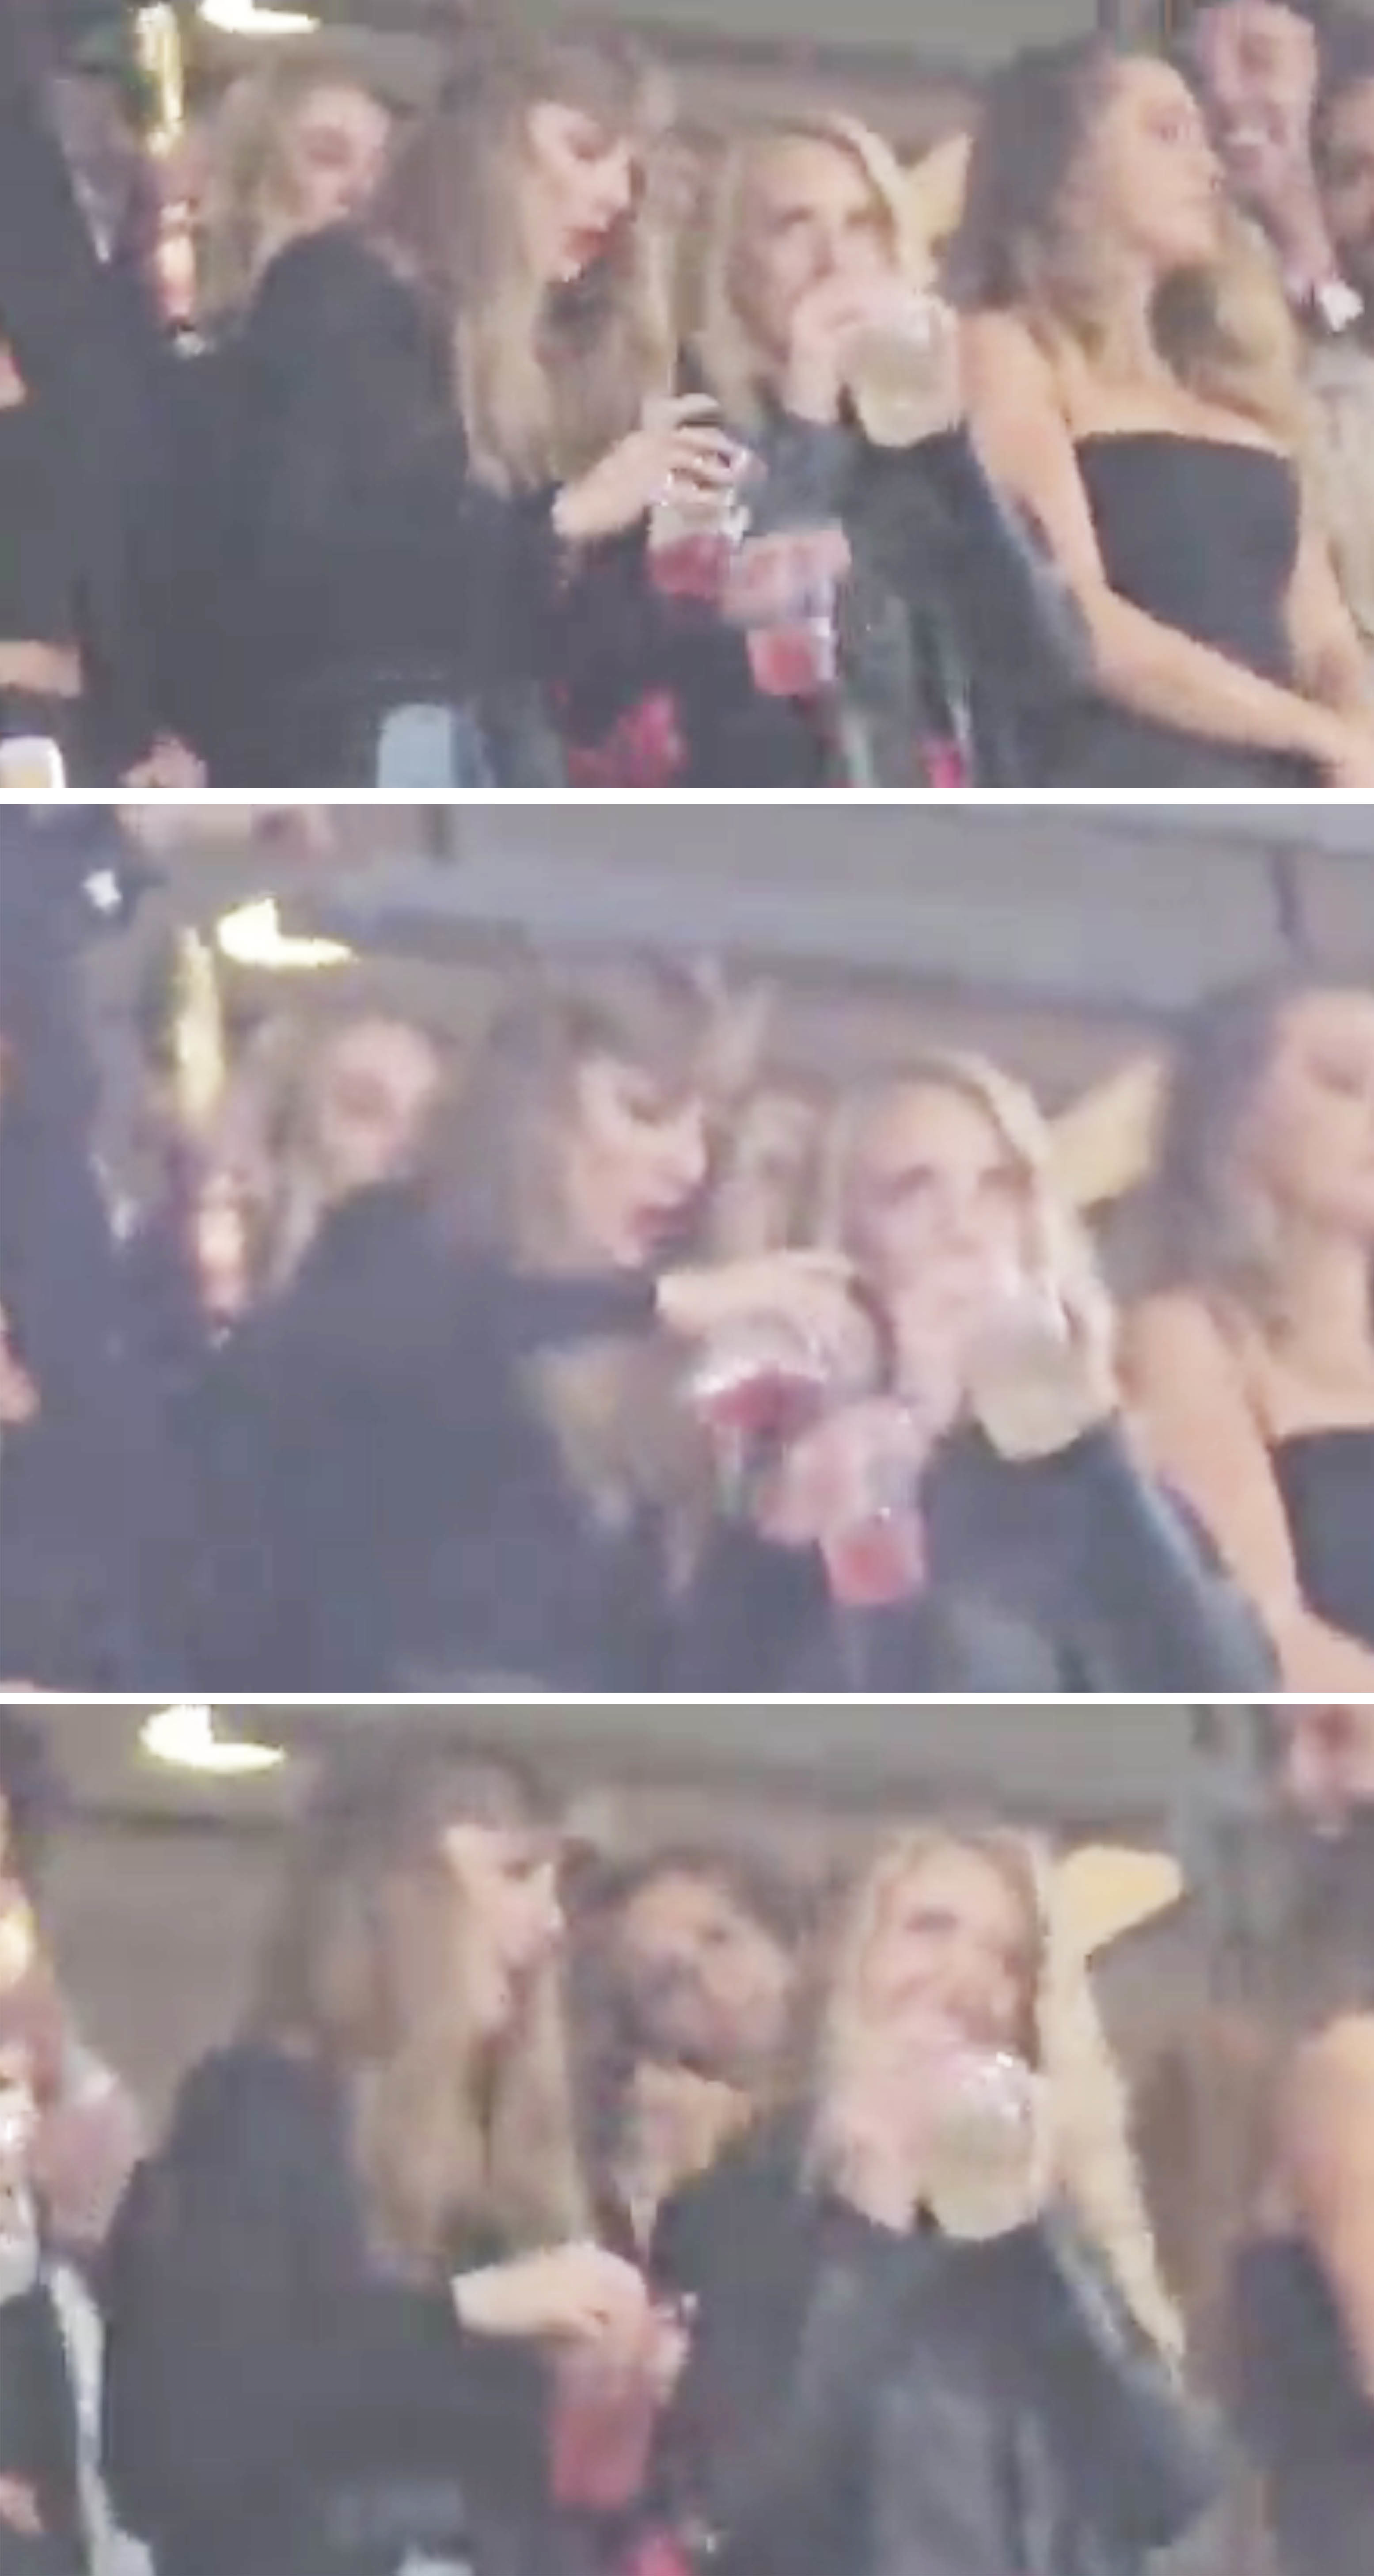 Closeup of Taylor pouring a drink